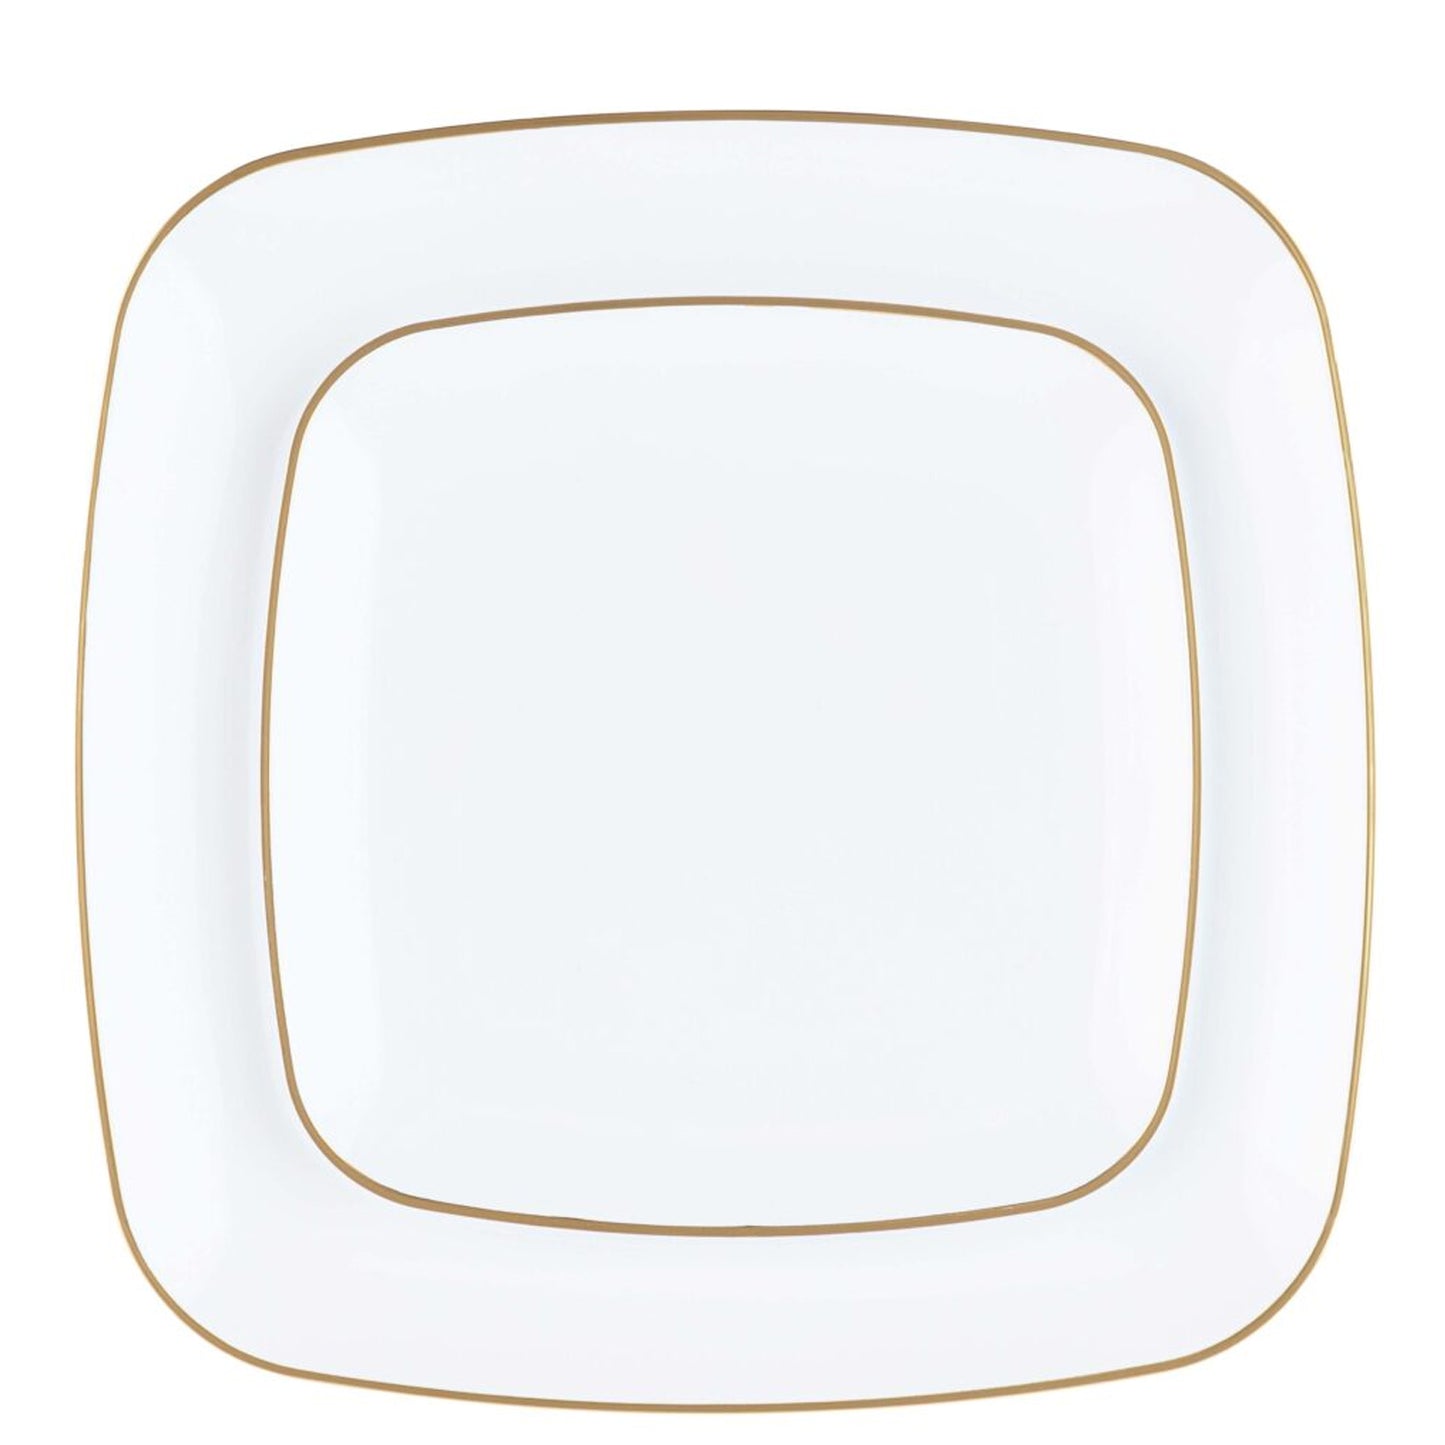 Organic Collection White and Gold Rim Square Dinner Plates 7.25" Tablesettings Blue Sky   